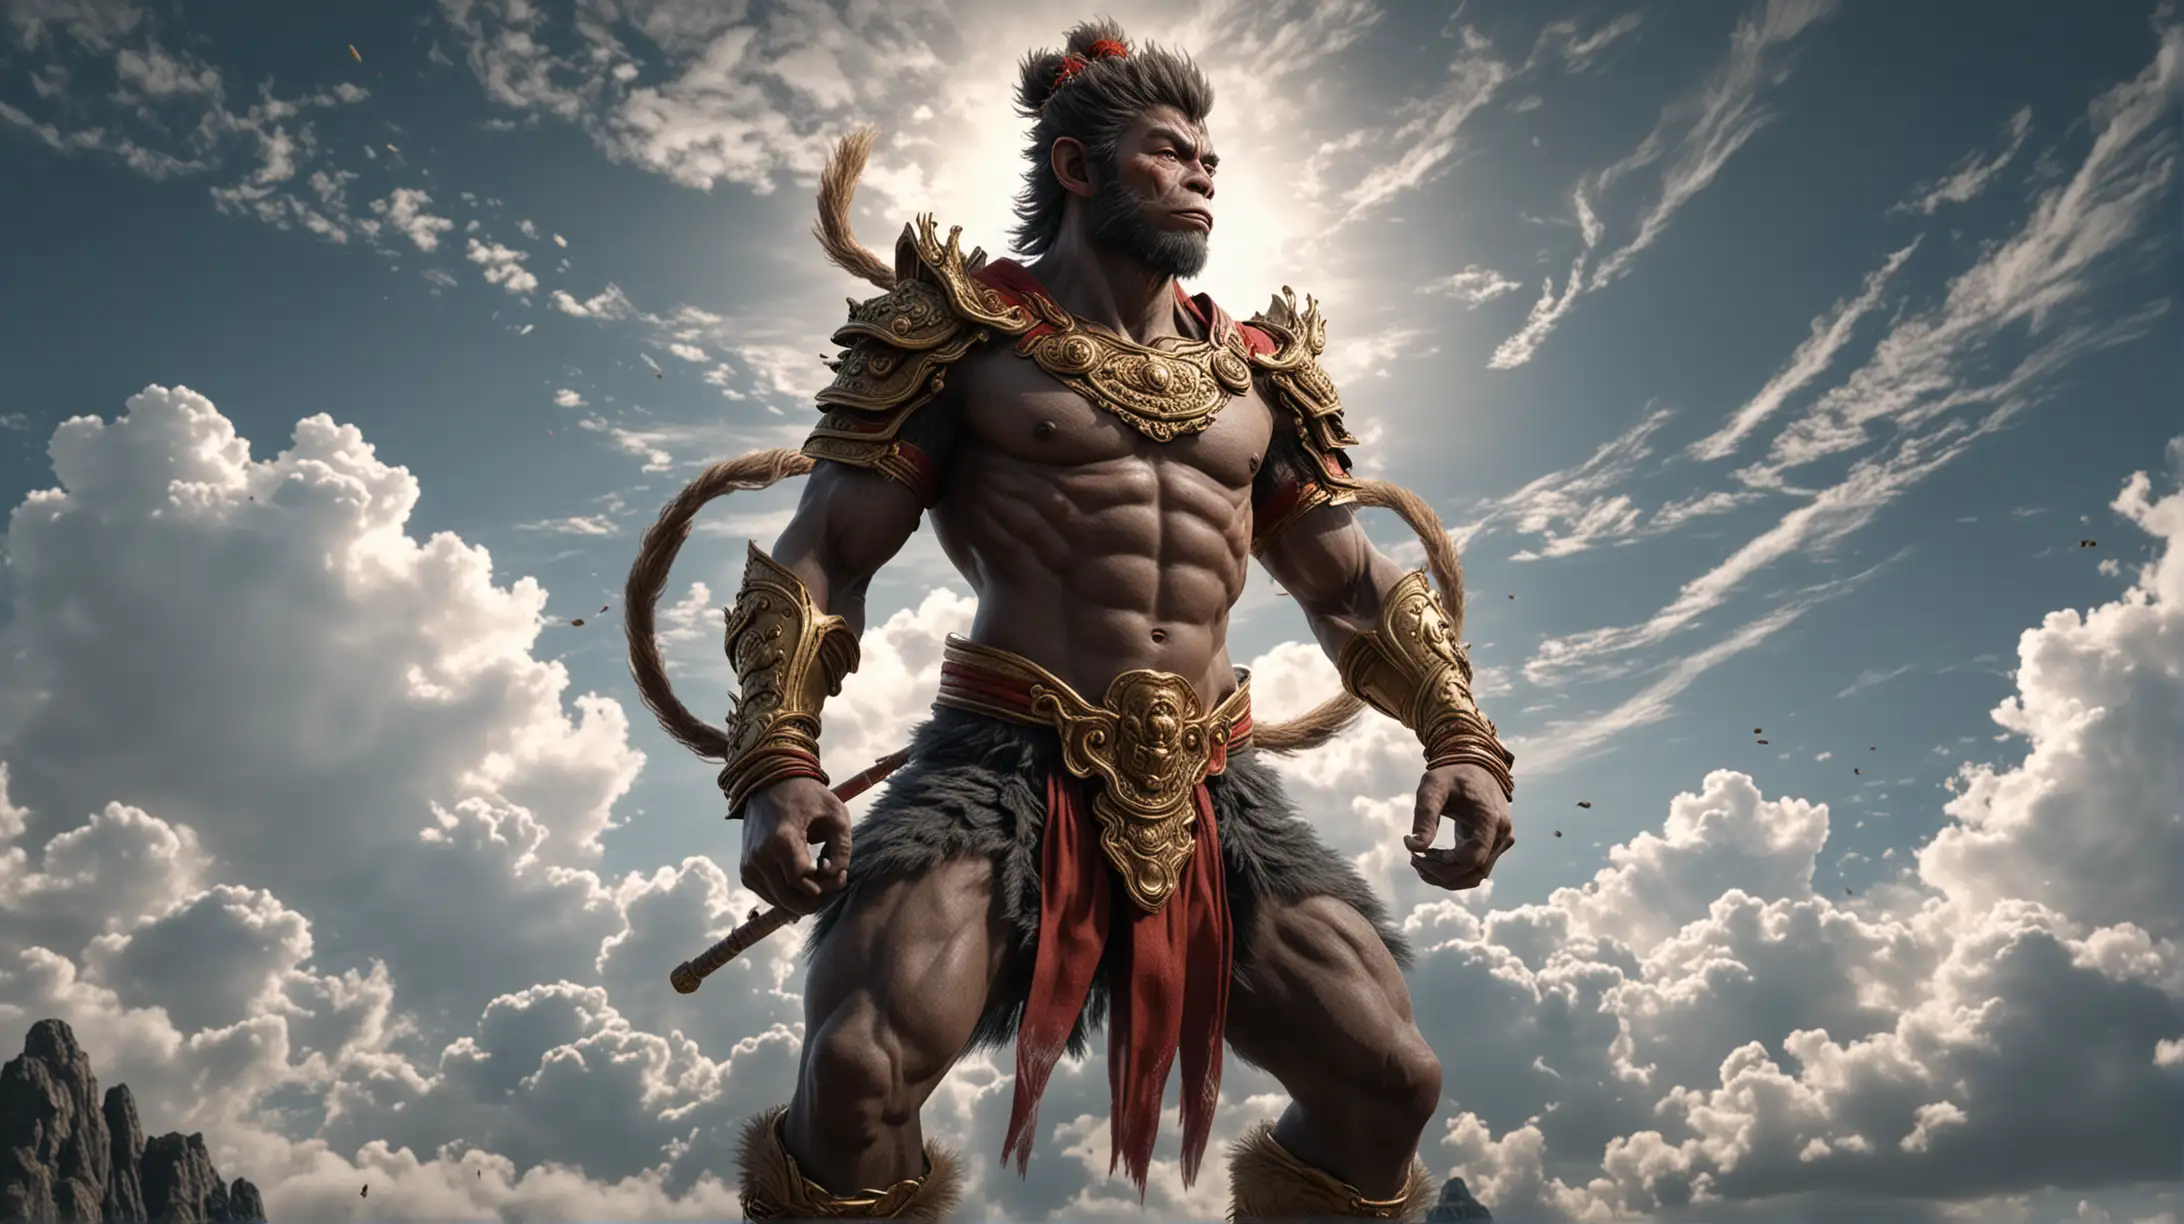 Generate a 4K hyperrealistic image depicting the son god wukong entire body facing the skies, facing backward.